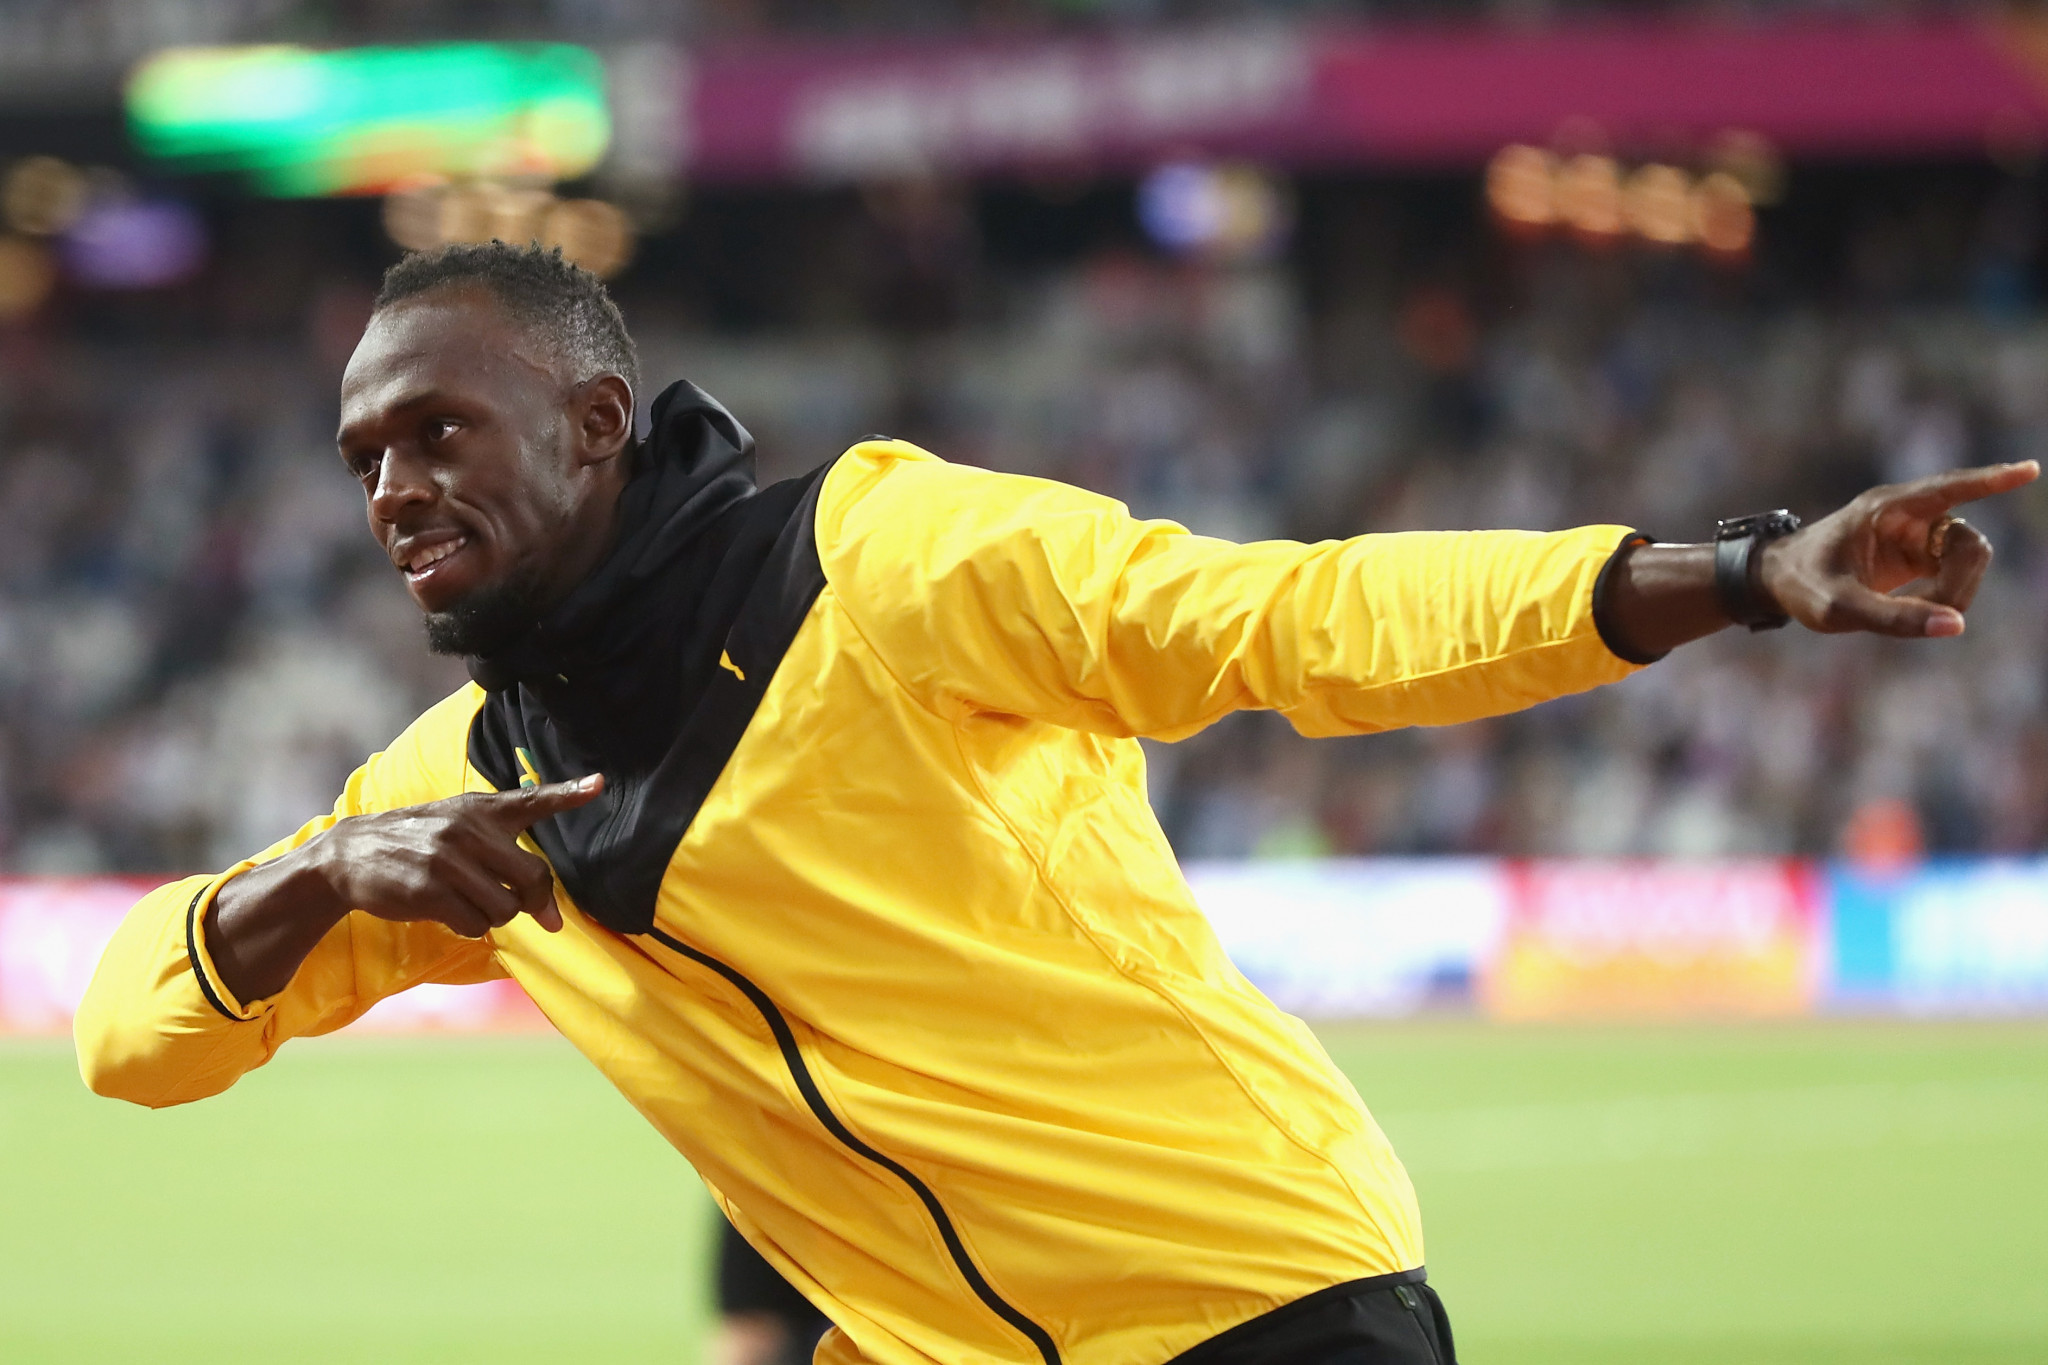 Gold Coast 2018 hope that Usain Bolt will attend the Commonwealth Games as an ambassador ©Getty Images